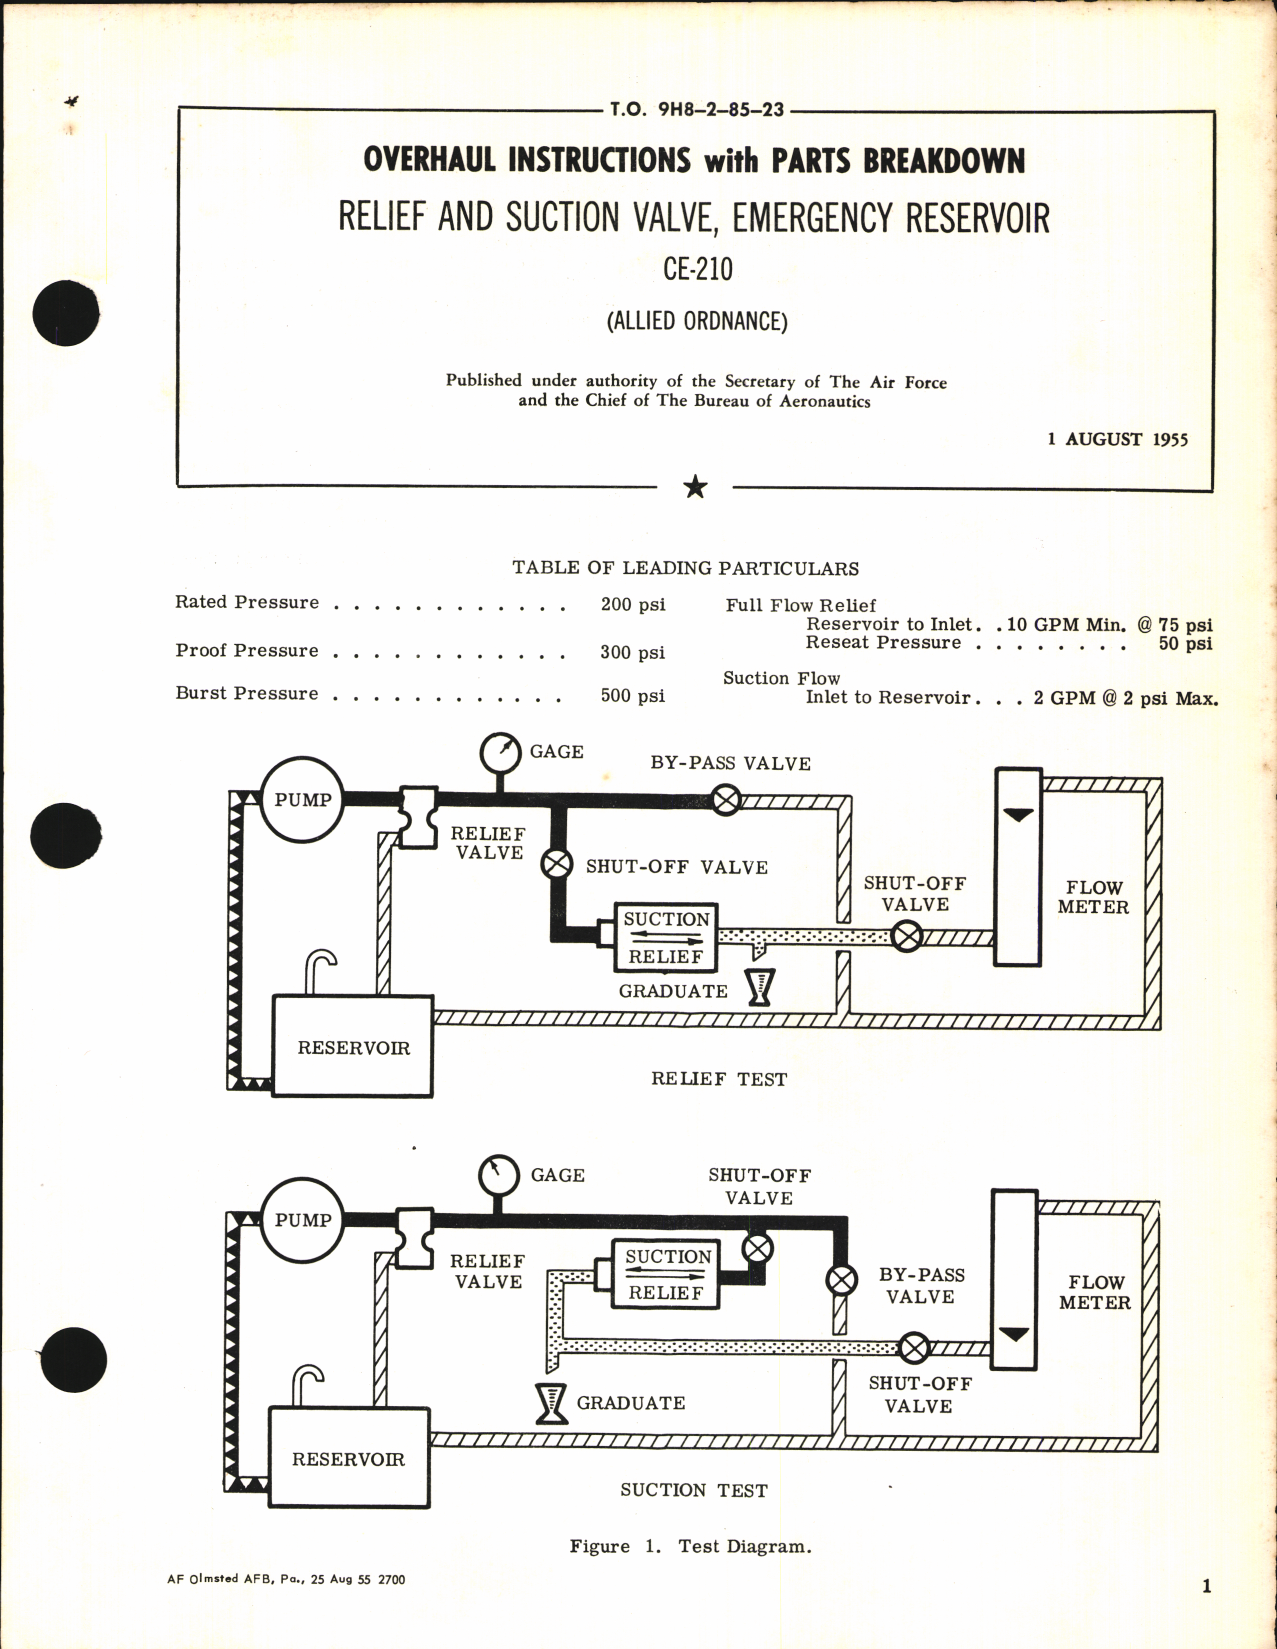 Sample page 1 from AirCorps Library document: Overhaul Instructions with Parts Breakdown for Relief and suction Valve, Emergency reservoir CE-210